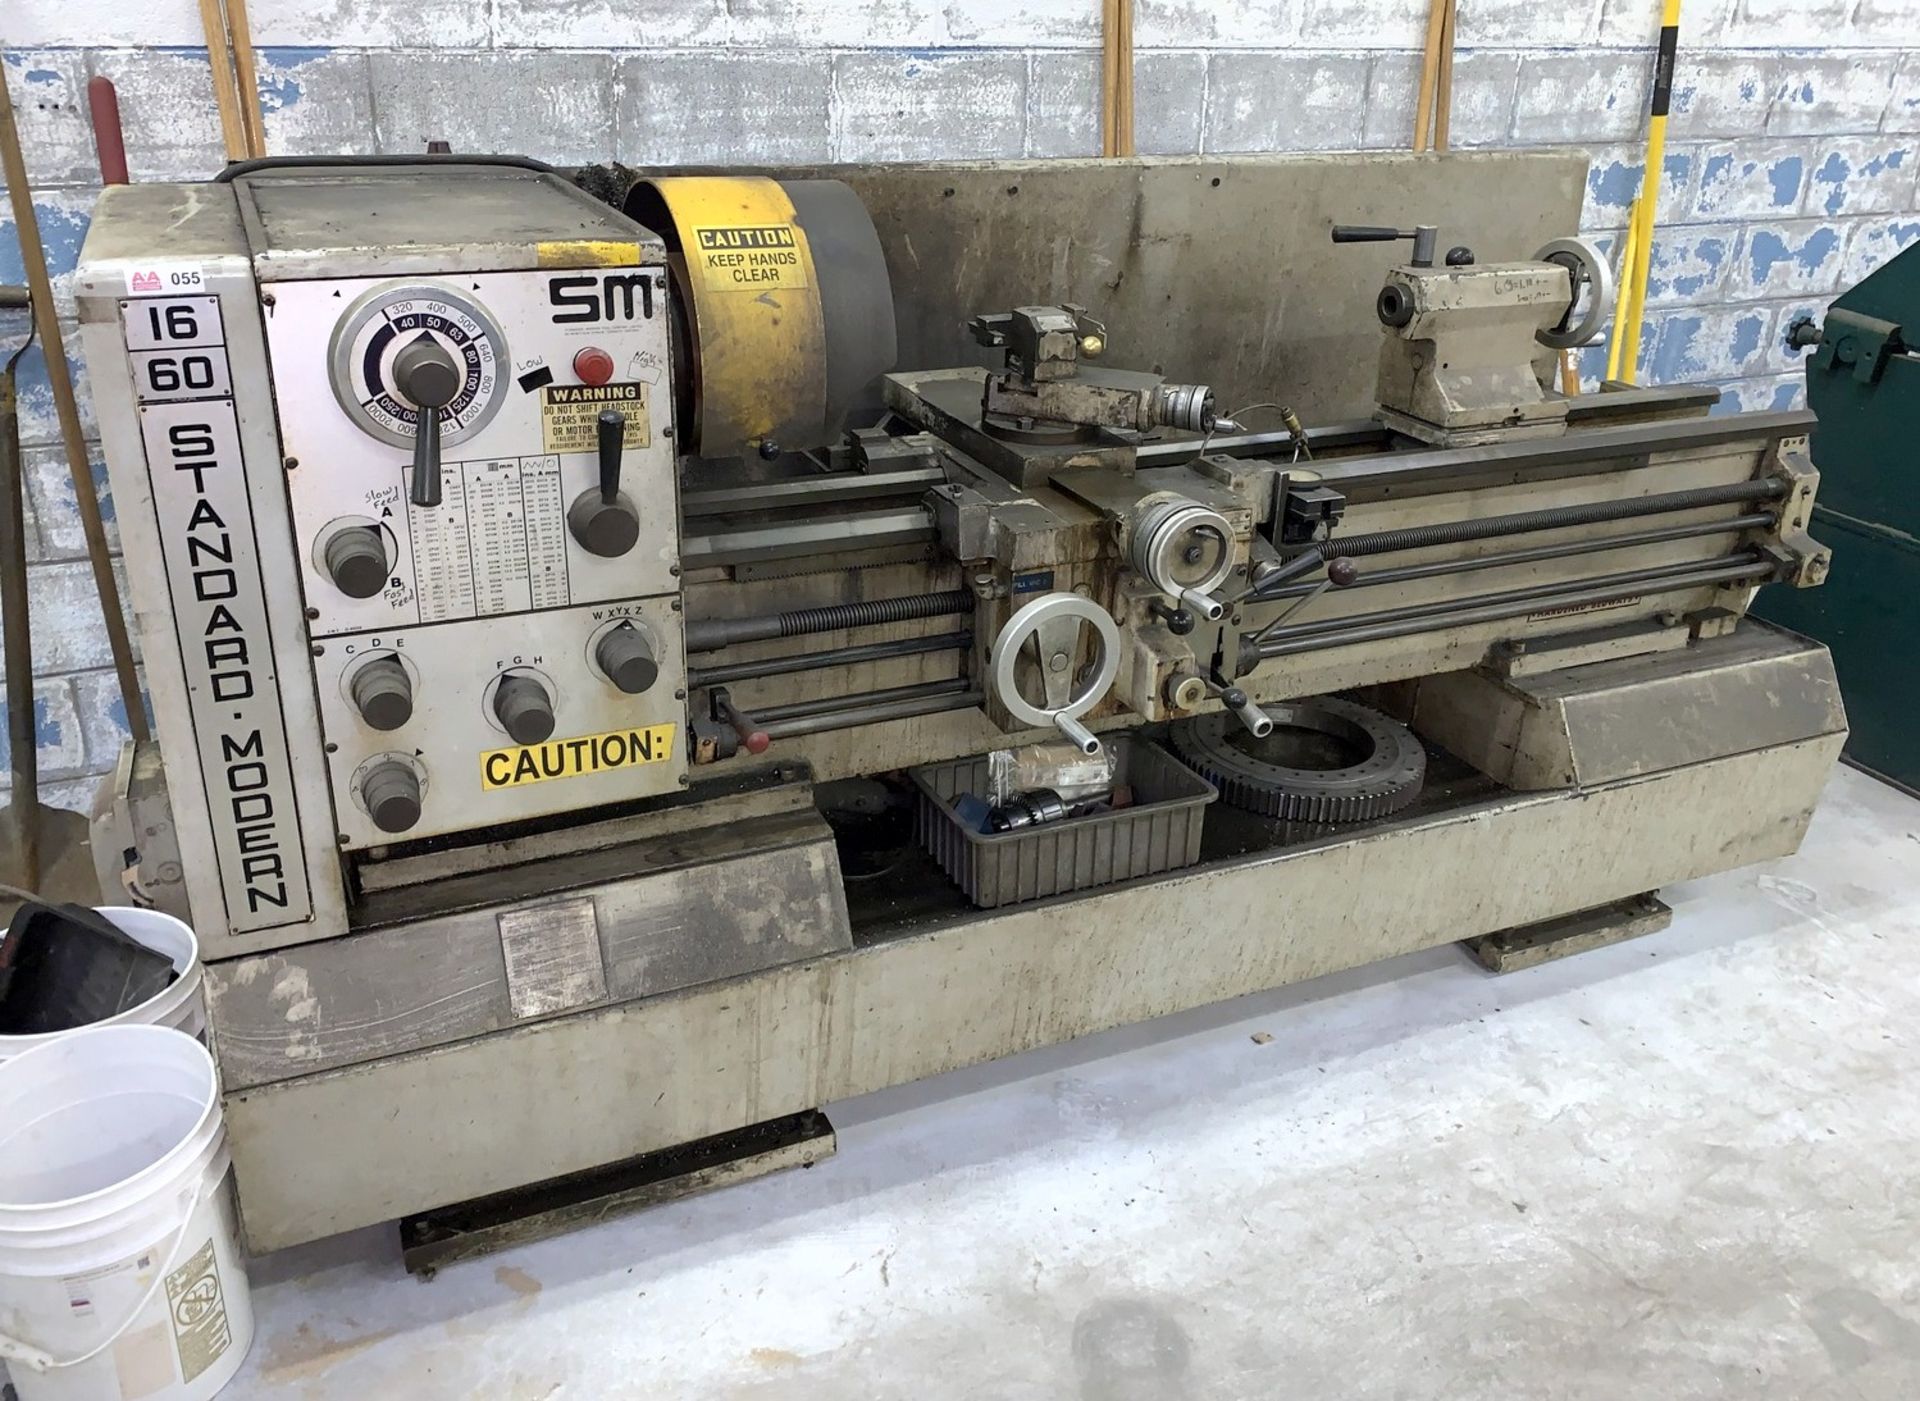 Standard Modern Lathe, 16"Diameter Swing, 60" Between Centers, Inch and Metric Threading, 40 to 2000